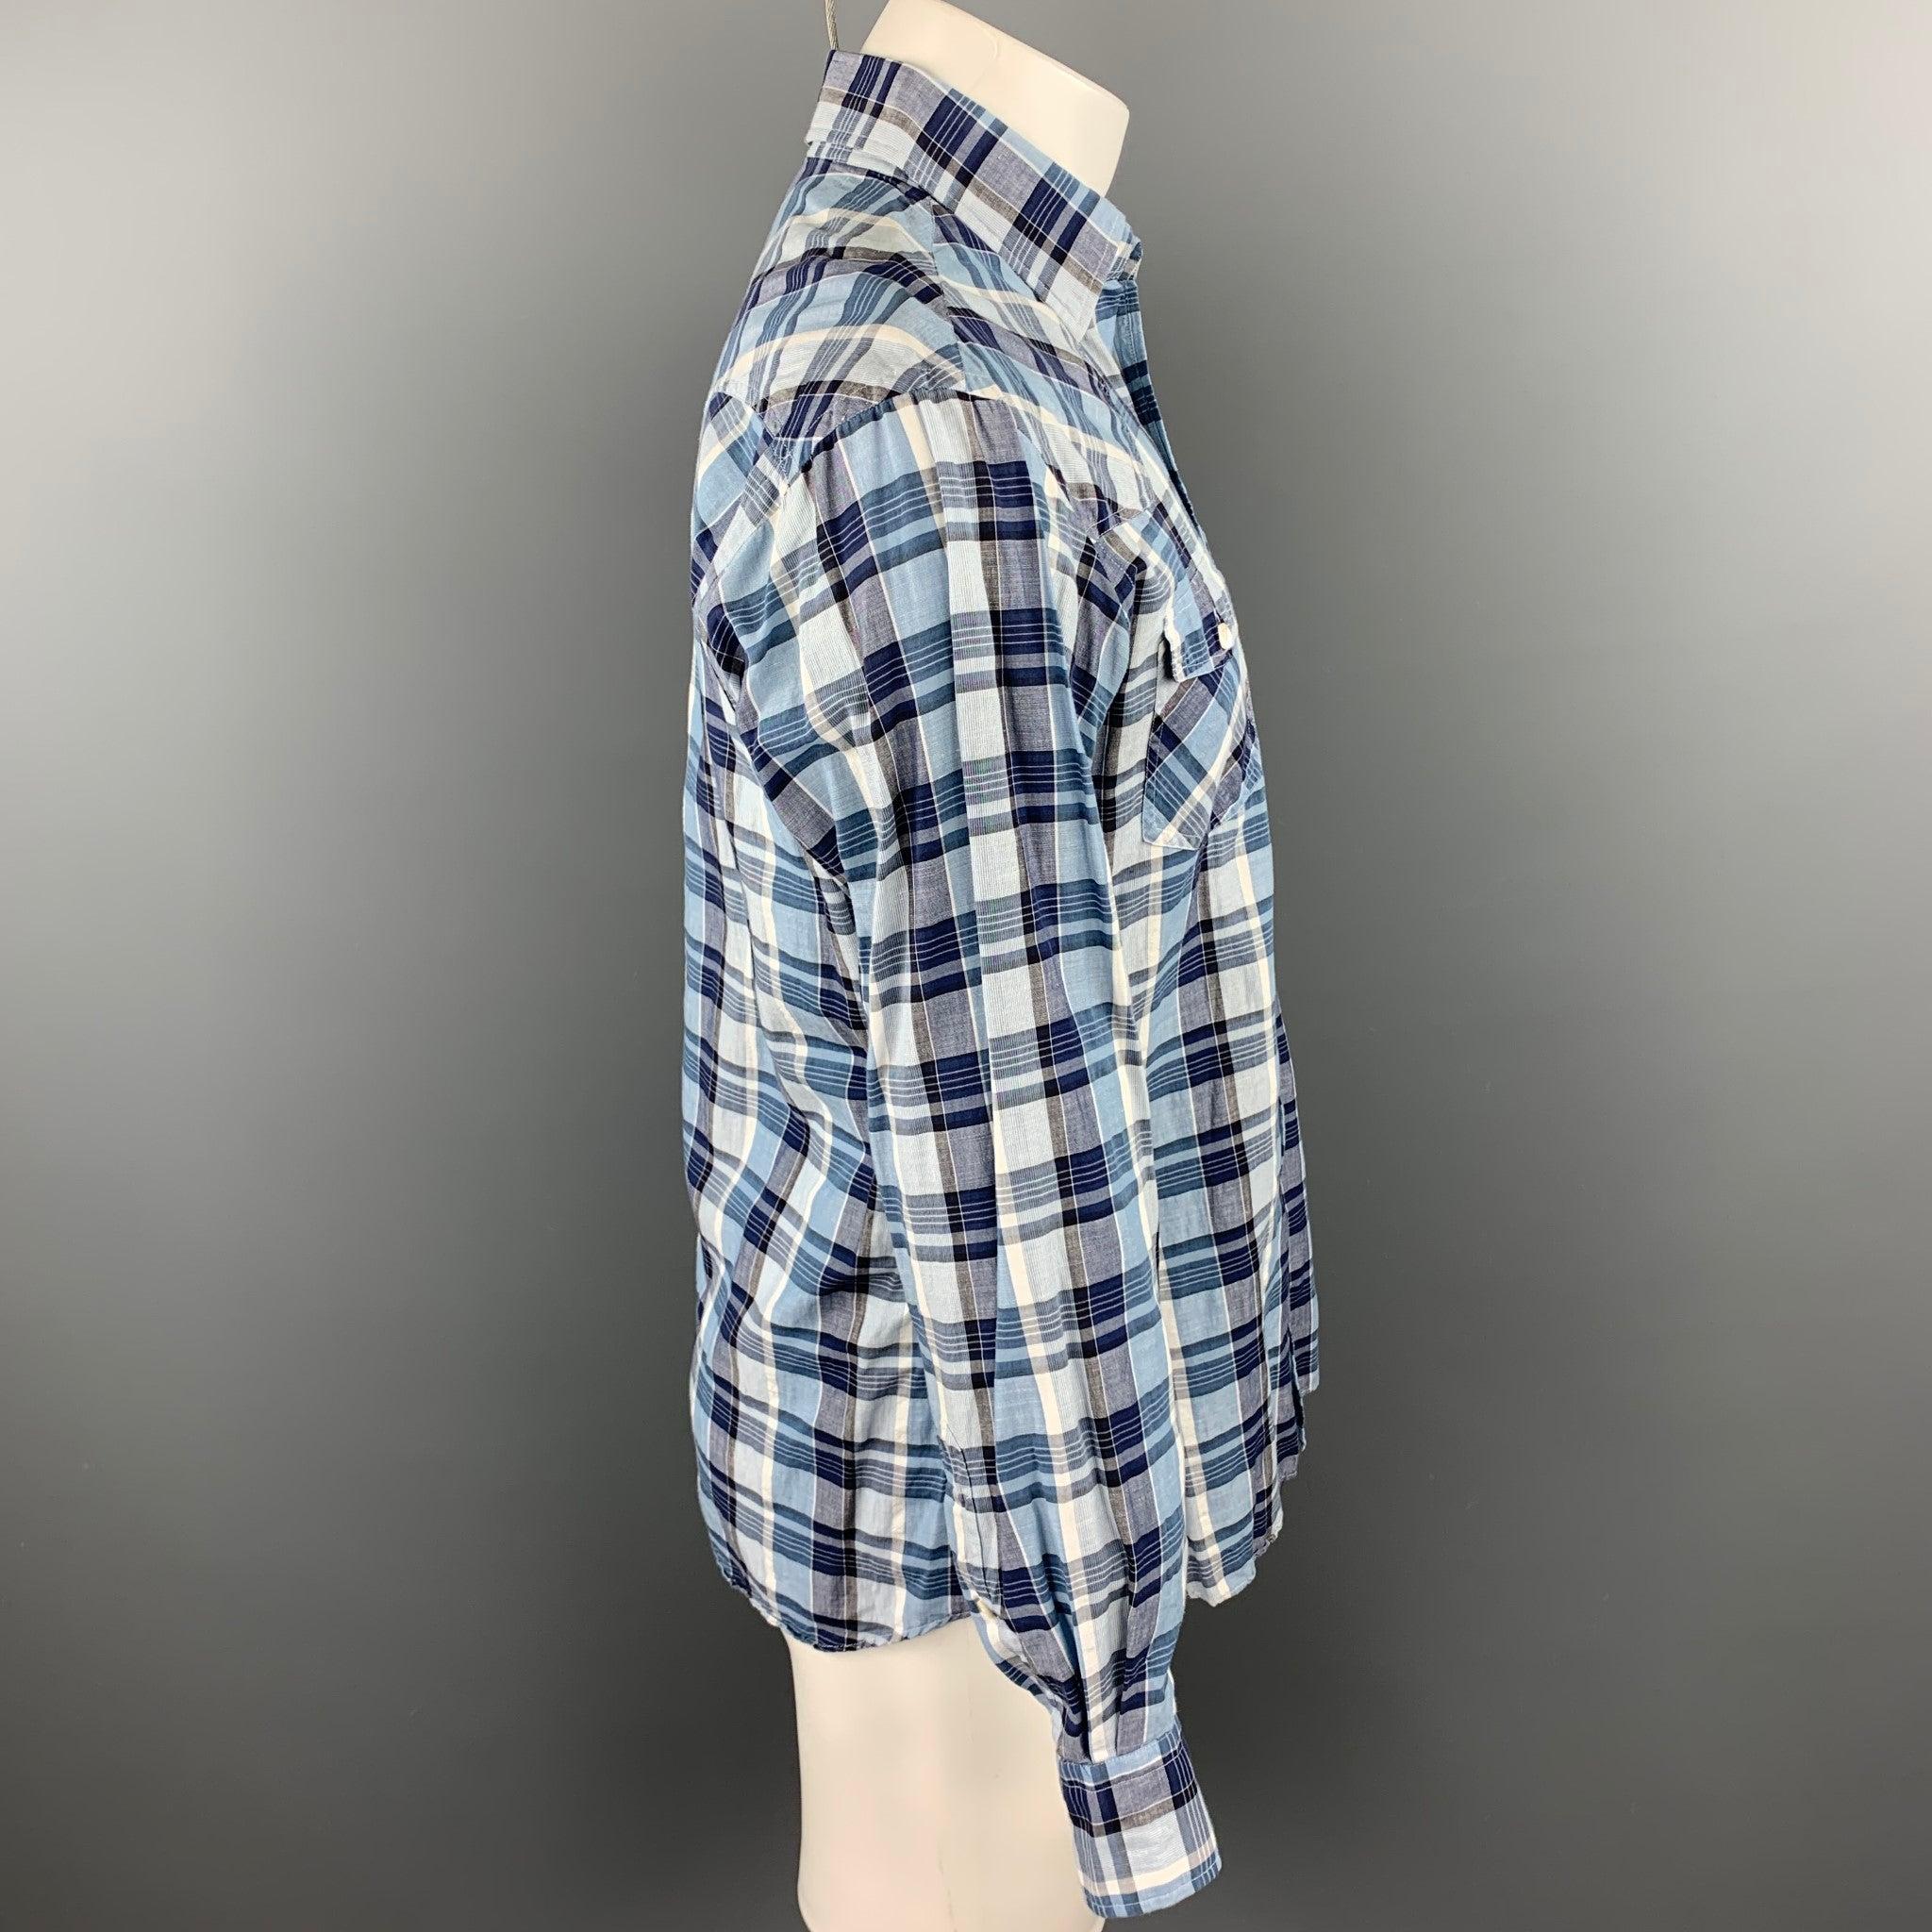 HAMILTON
long sleeve shirt comes in a blue plaid cotton featuring a button up style, front pockets, and a spread collar. Made in USA.Good Pre-Owned Condition. 

Marked:   M 

Measurements: 
 
Shoulder: 18.5 inches 
Chest: 42 inches 
Sleeve: 24.5